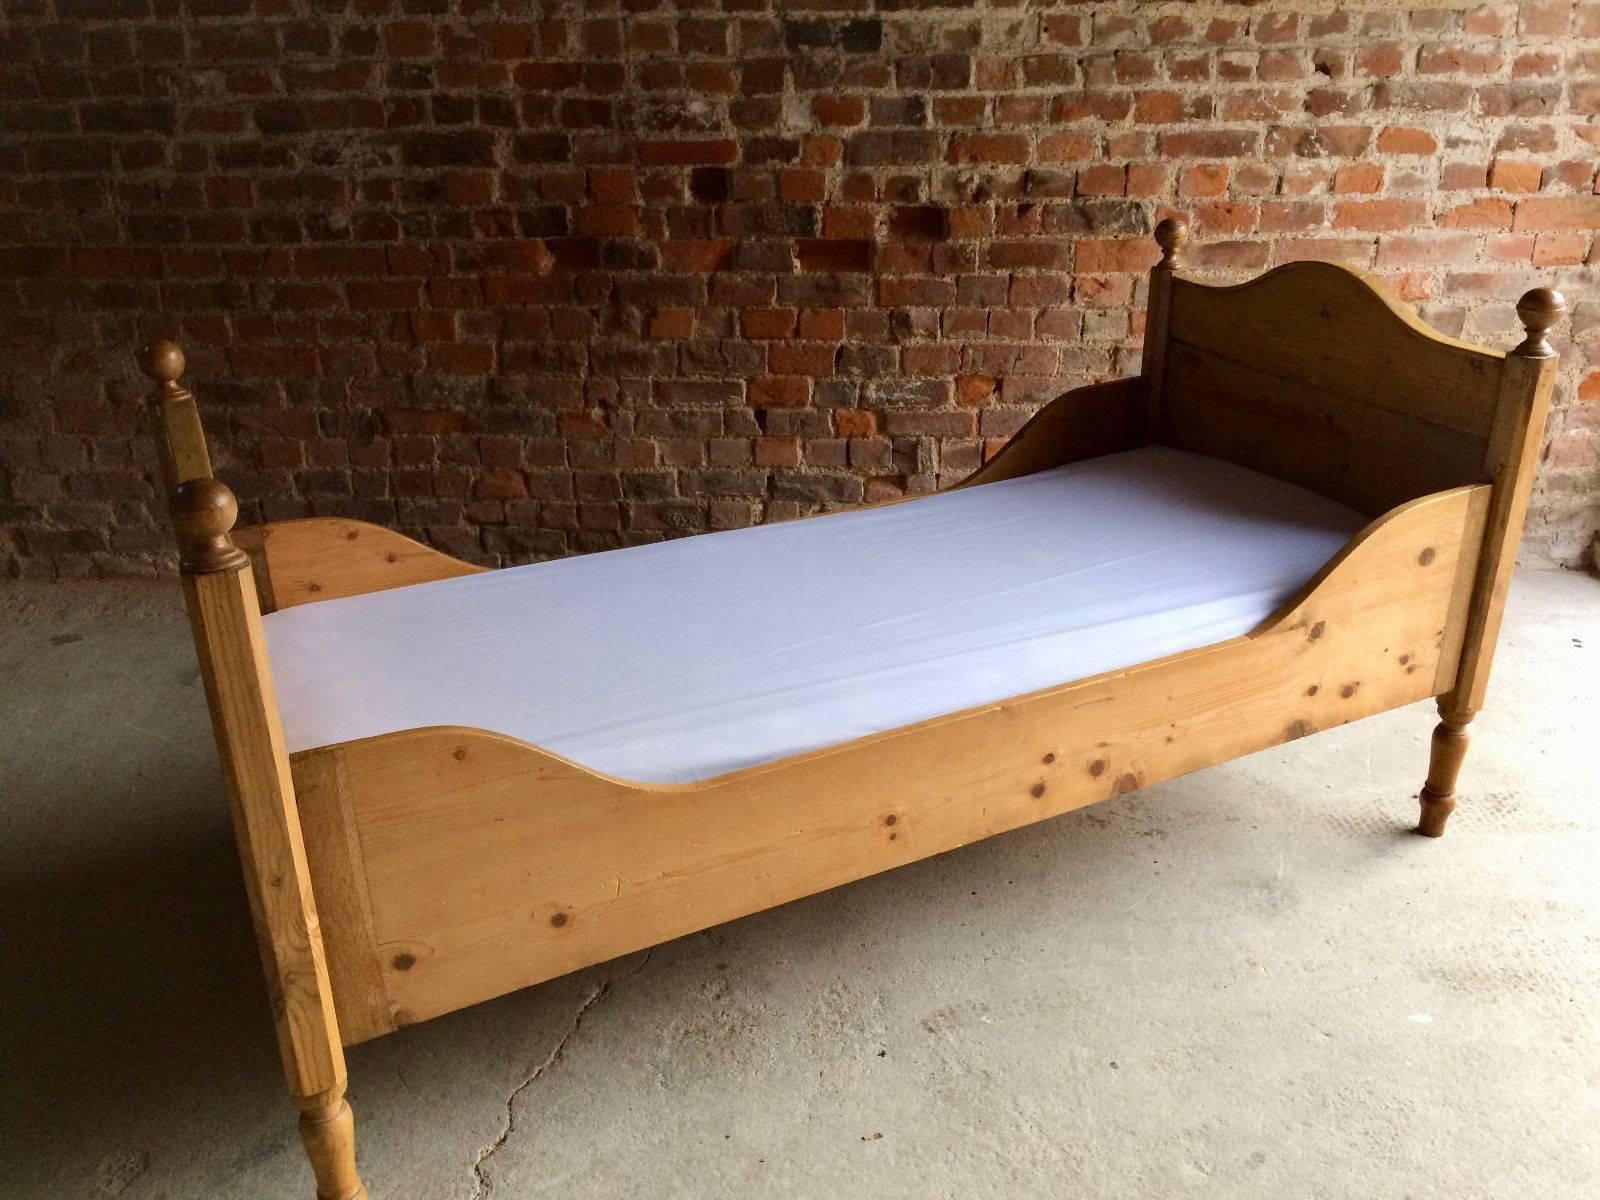 Antique, 19th century solid pine daybed, both ends with finials and raised on turned legs, comes with a single mattress and bed sheet resting on slats, the bed comes apart and simply slots together, total four sections including the mattress.